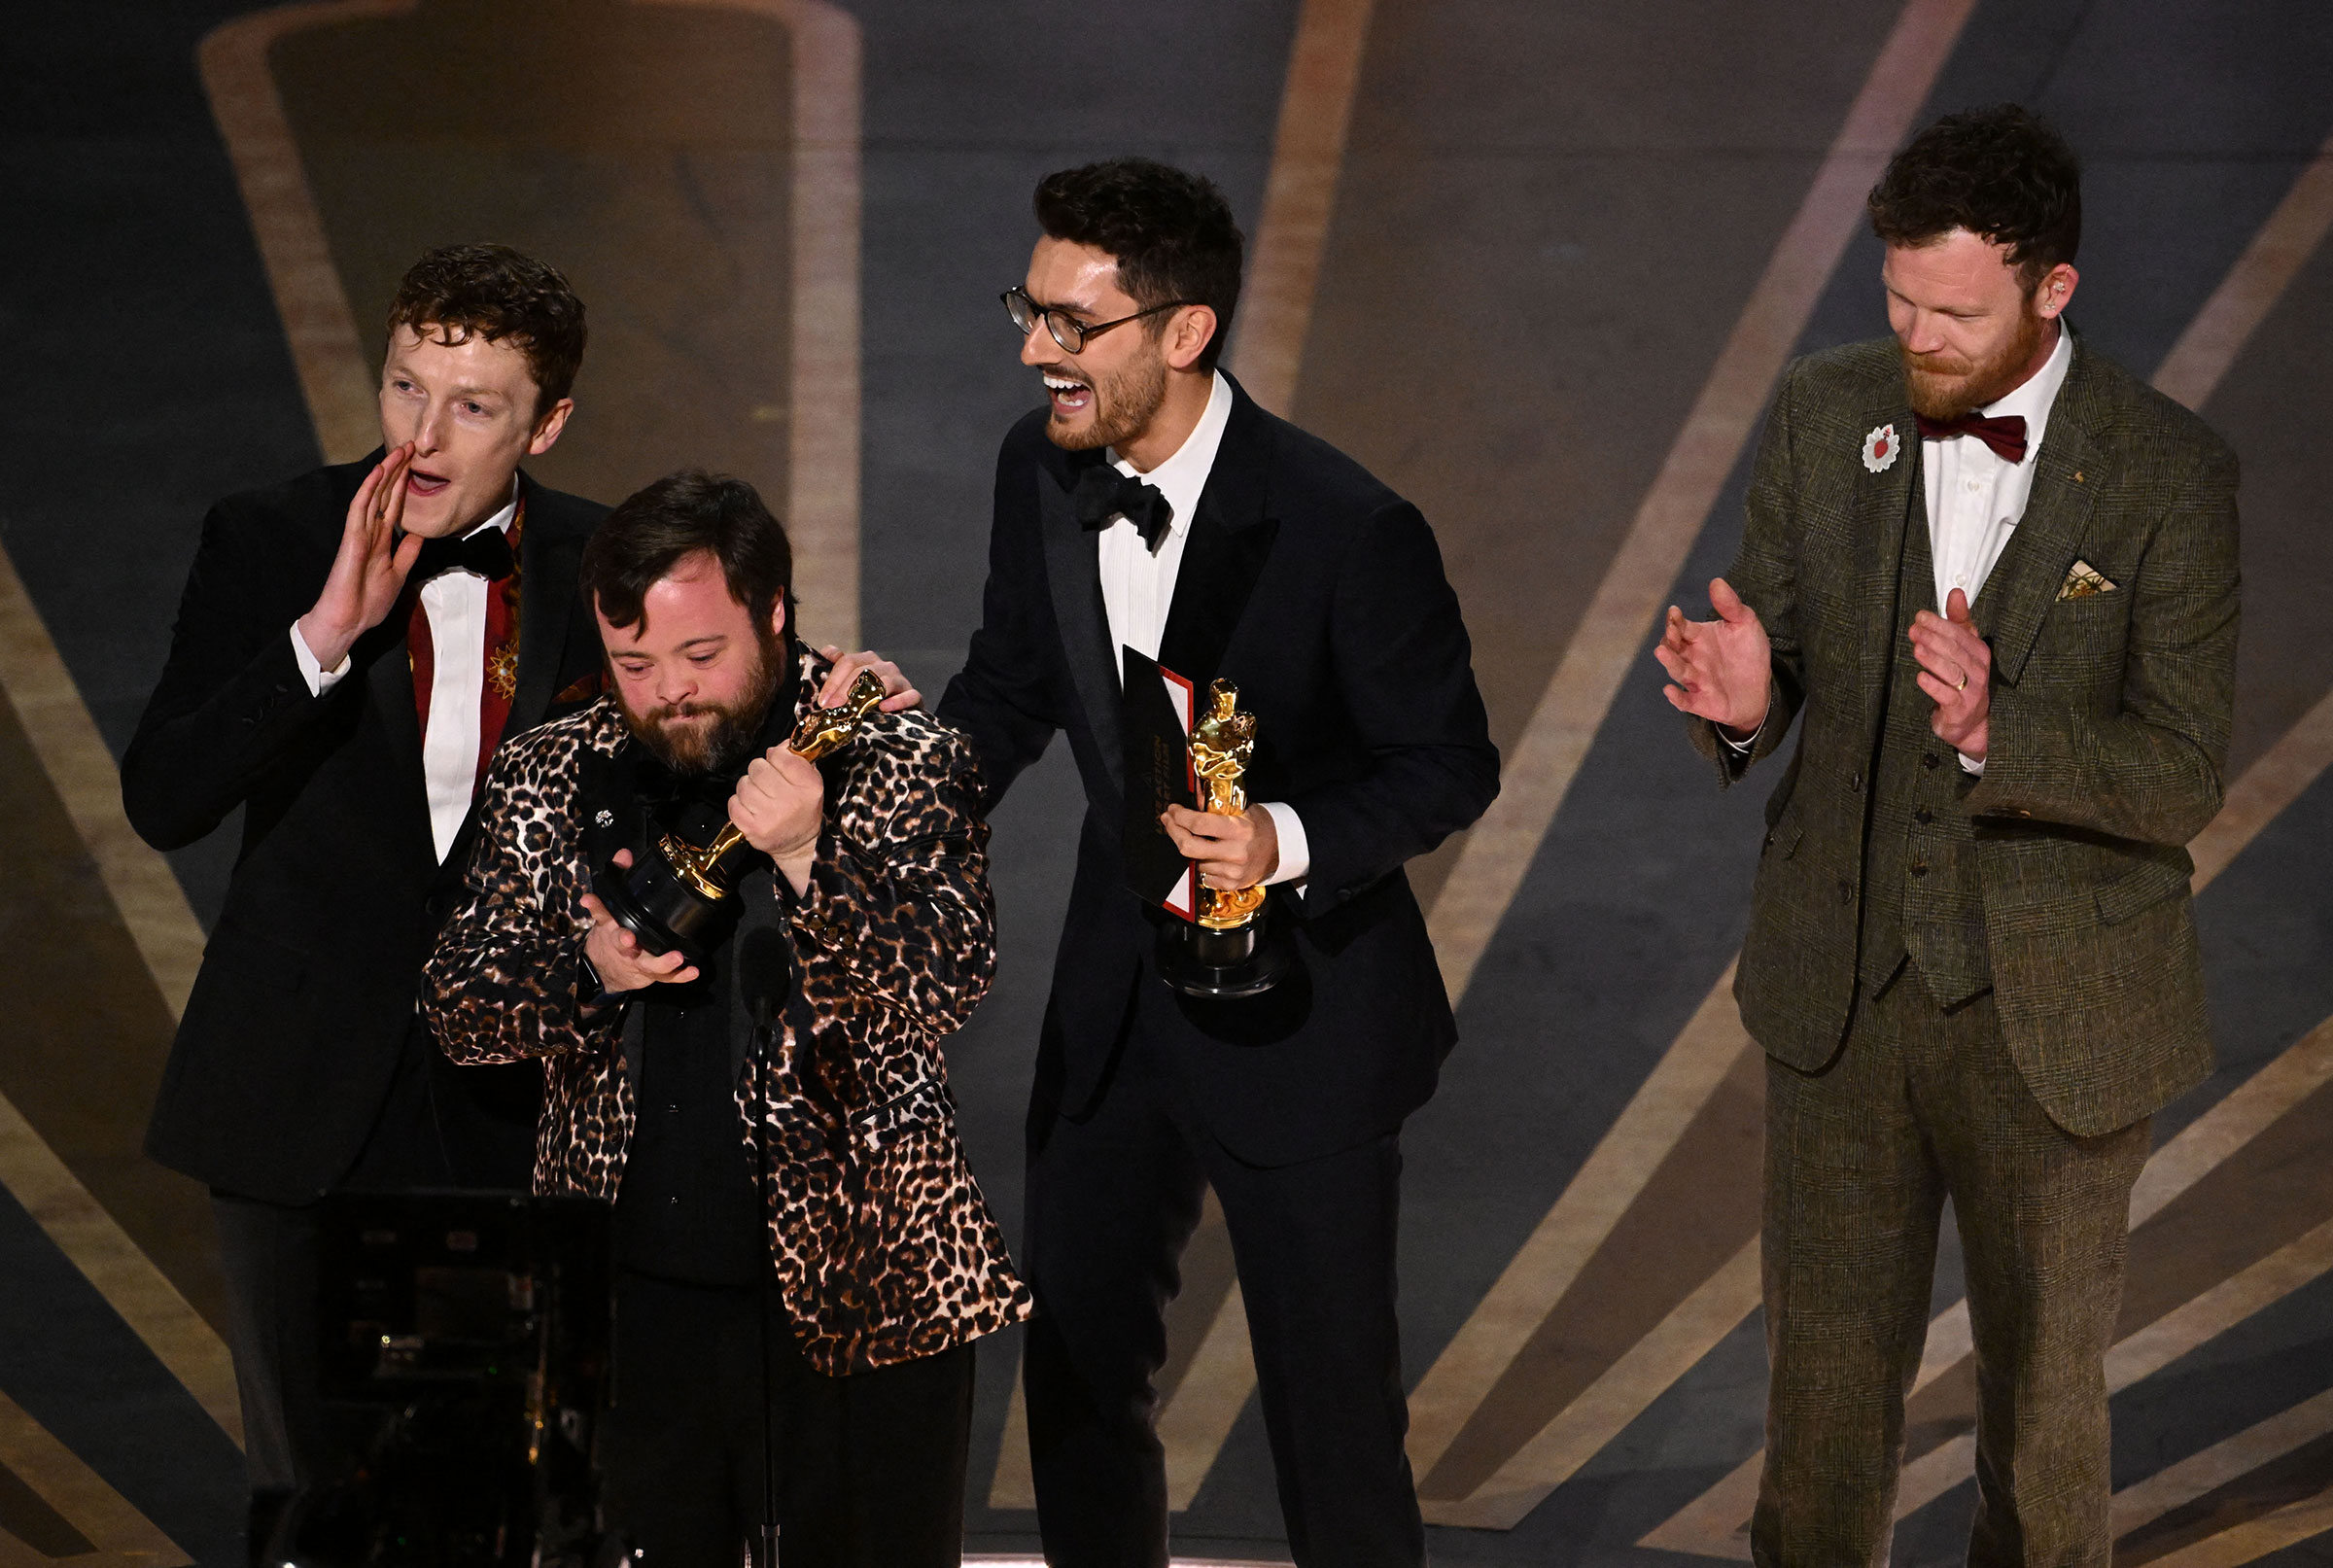 Ross White, James Martin , Tom Berkeley and Seamus O'Hara accept the Oscar for Best Live Action Short Film for "An Irish Goodbye". (Patrick T. Fallon—AFP/Getty Images)